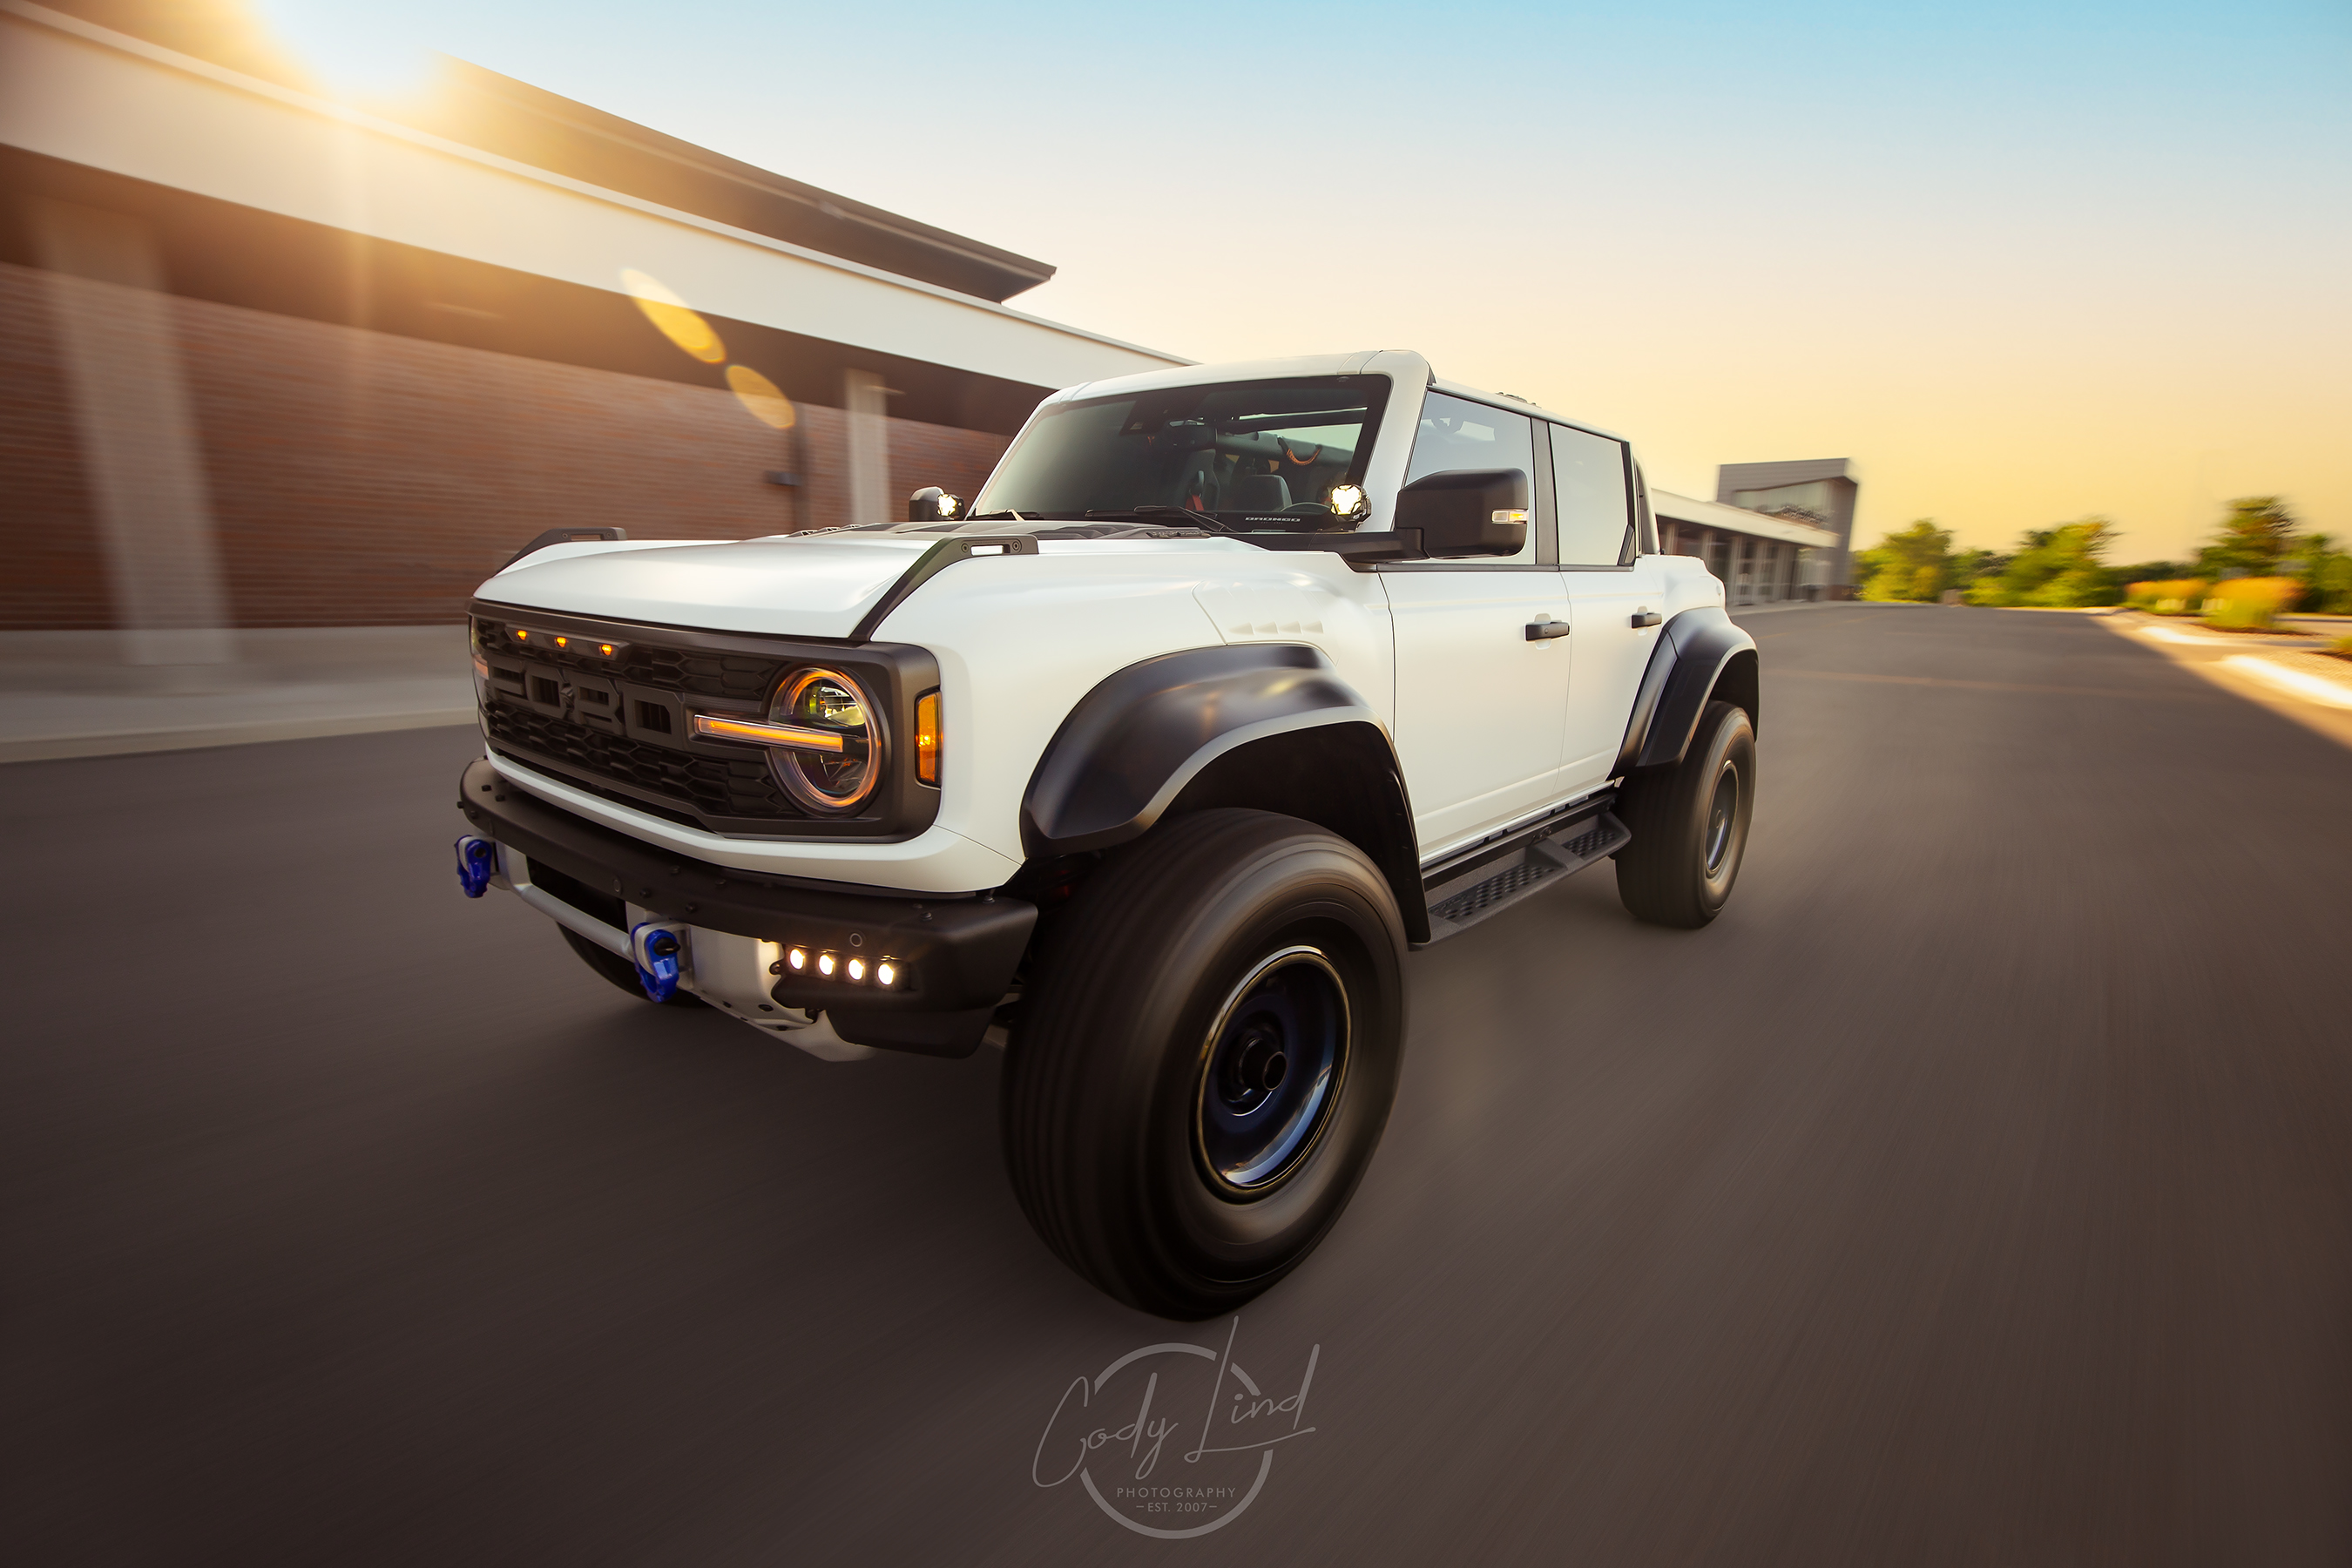 Ford Bronco Bronco Raptor in Oxford White - Professional photo shoot.  Credits:  the Very talented Cody Lind https://codylindphotography.com/ IMG_9850